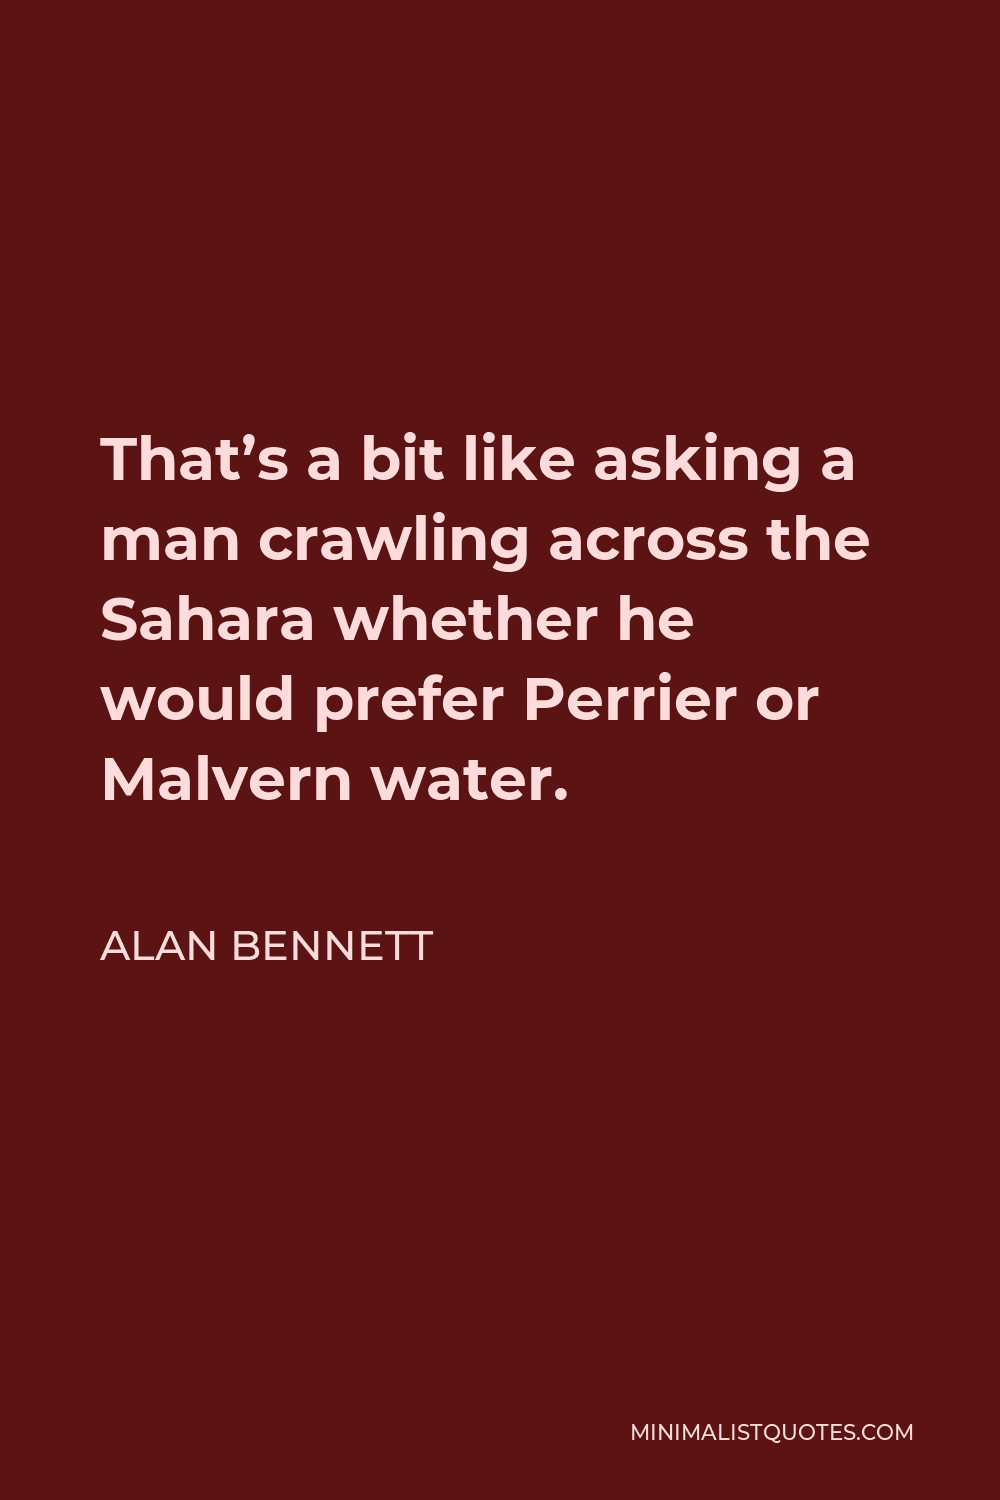 Alan Bennett Quote - That’s a bit like asking a man crawling across the Sahara whether he would prefer Perrier or Malvern water.